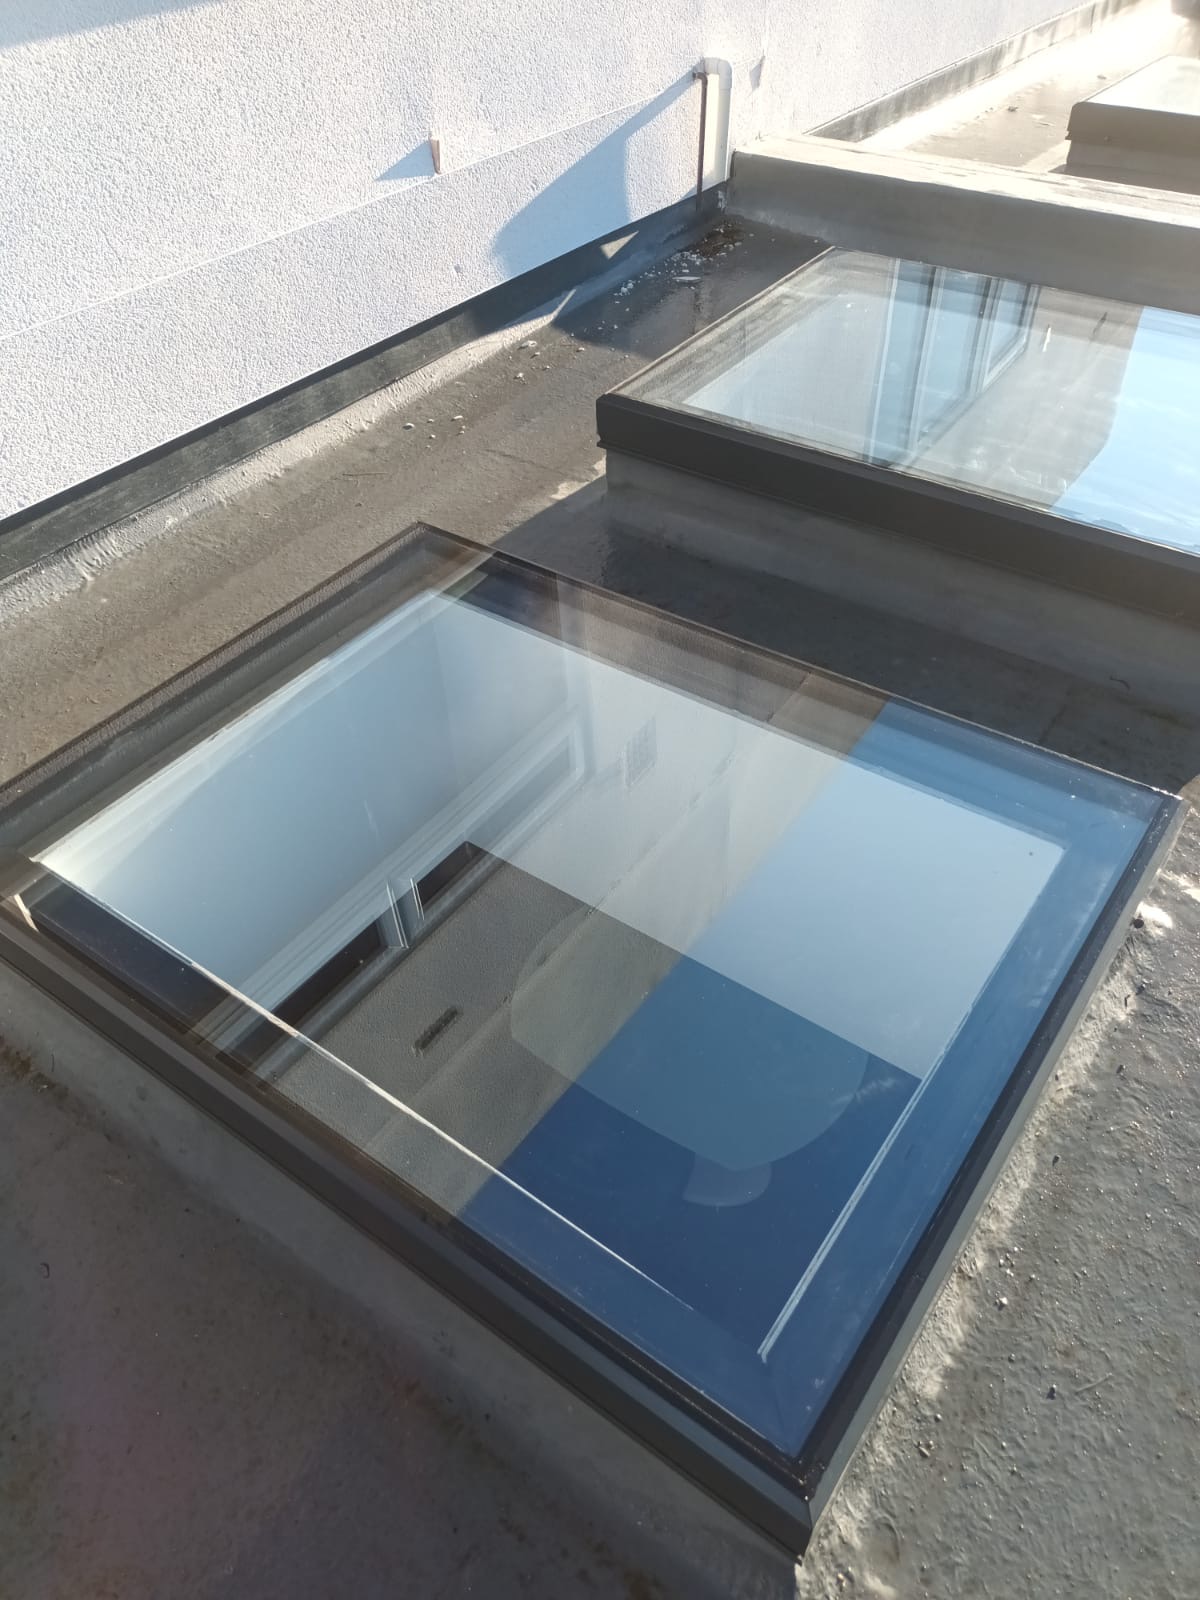 Two roof lights on a flat roof